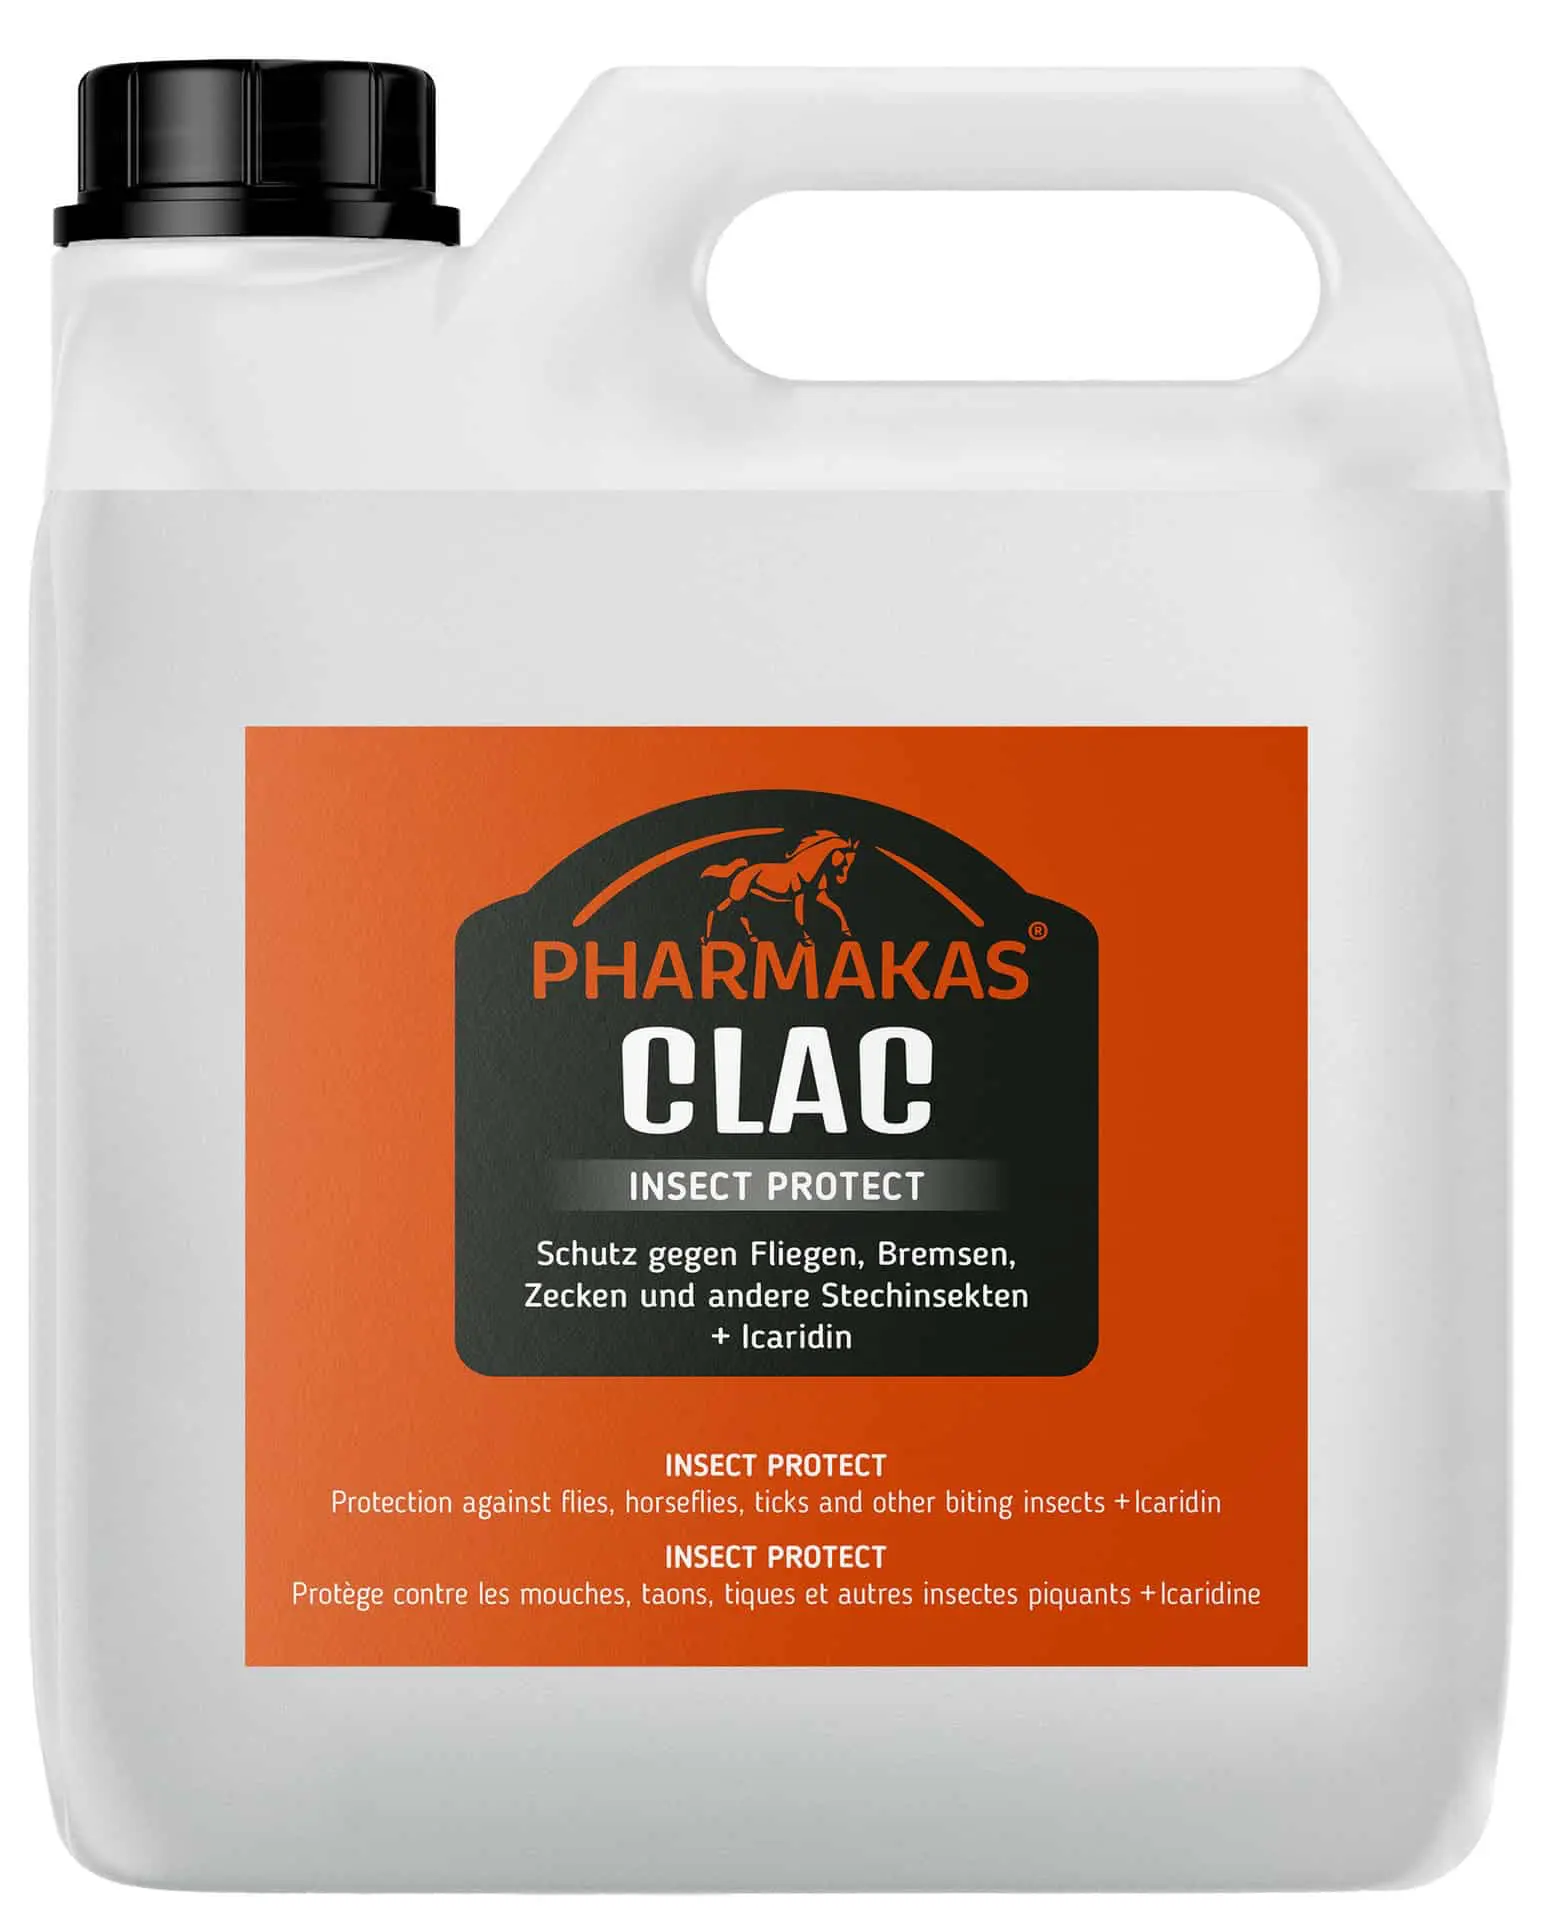 Pharmakas Clac Insect Protect 2,5 L